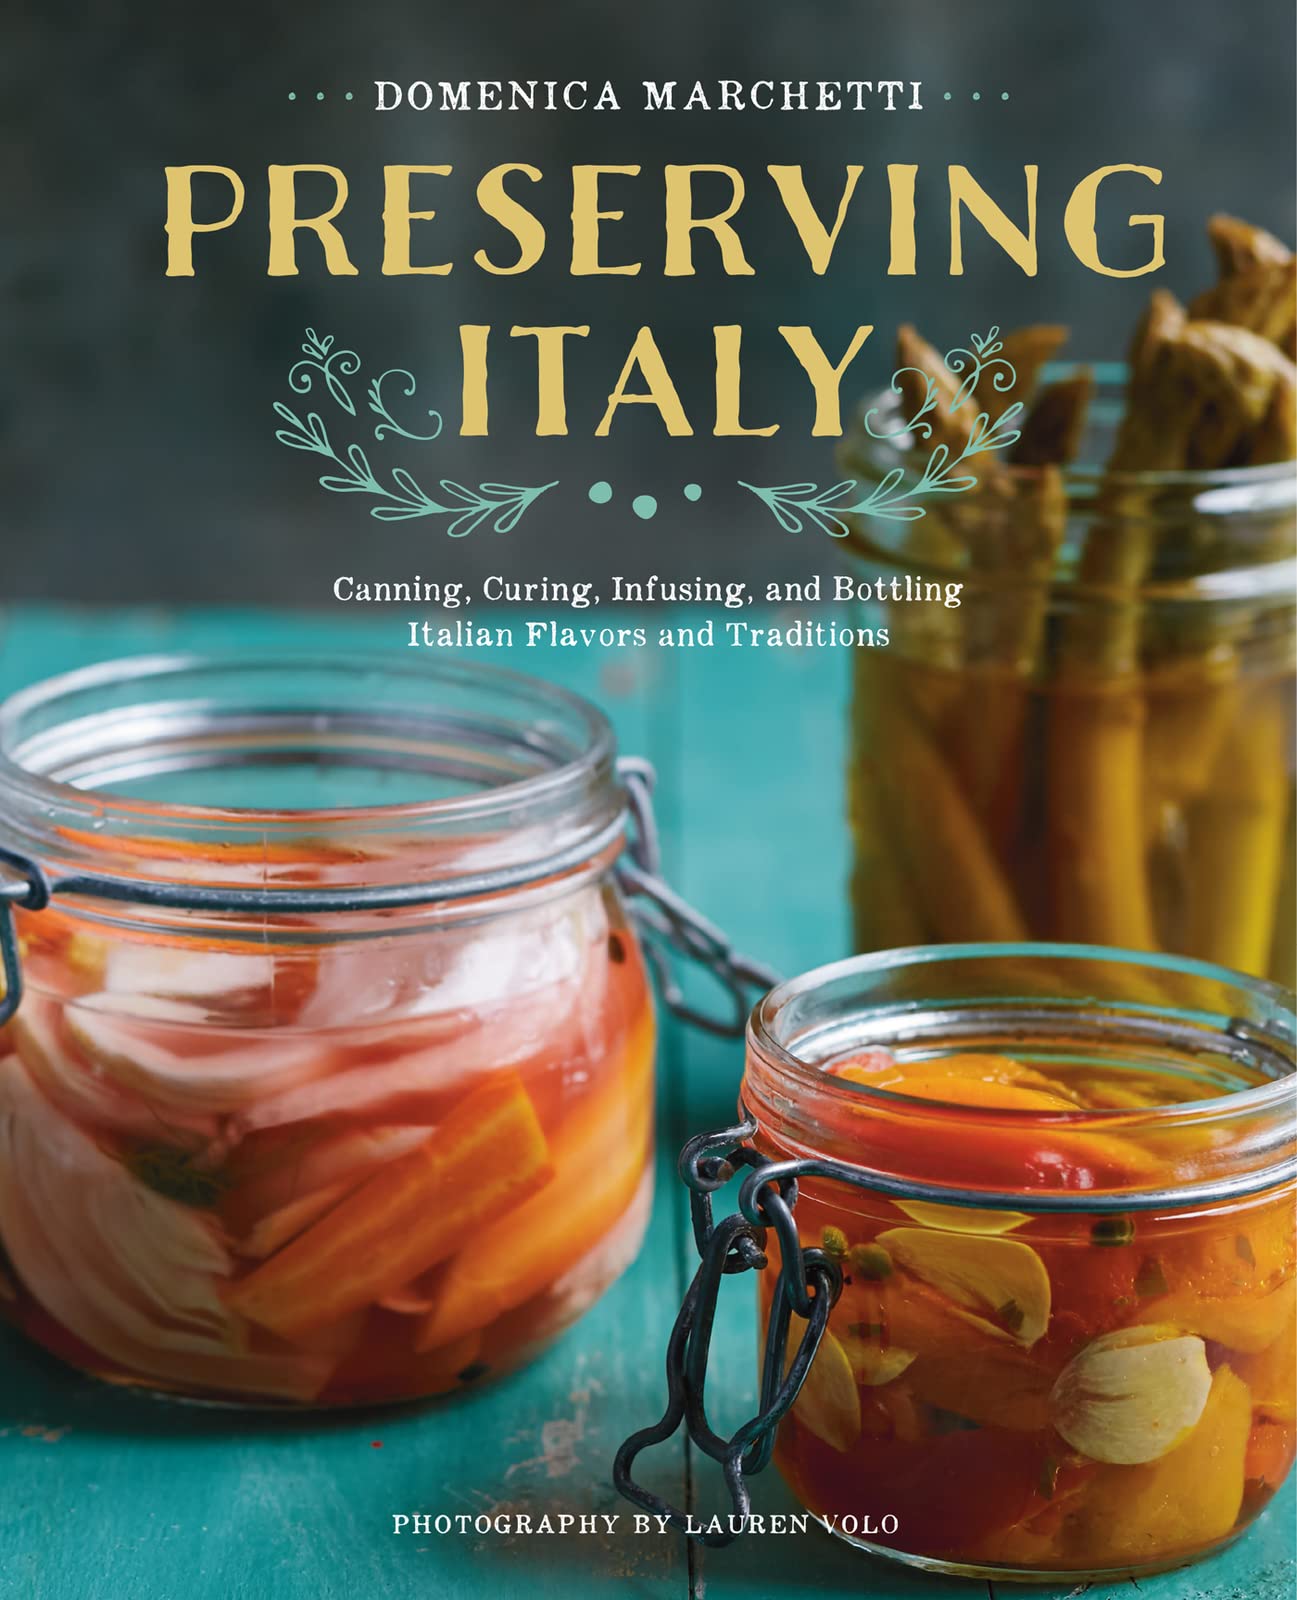 Preserving Italy: Canning, Curing, Infusing, and Bottling Italian Flavors and Traditions Author Domenica Marchetti Copy LIB-041